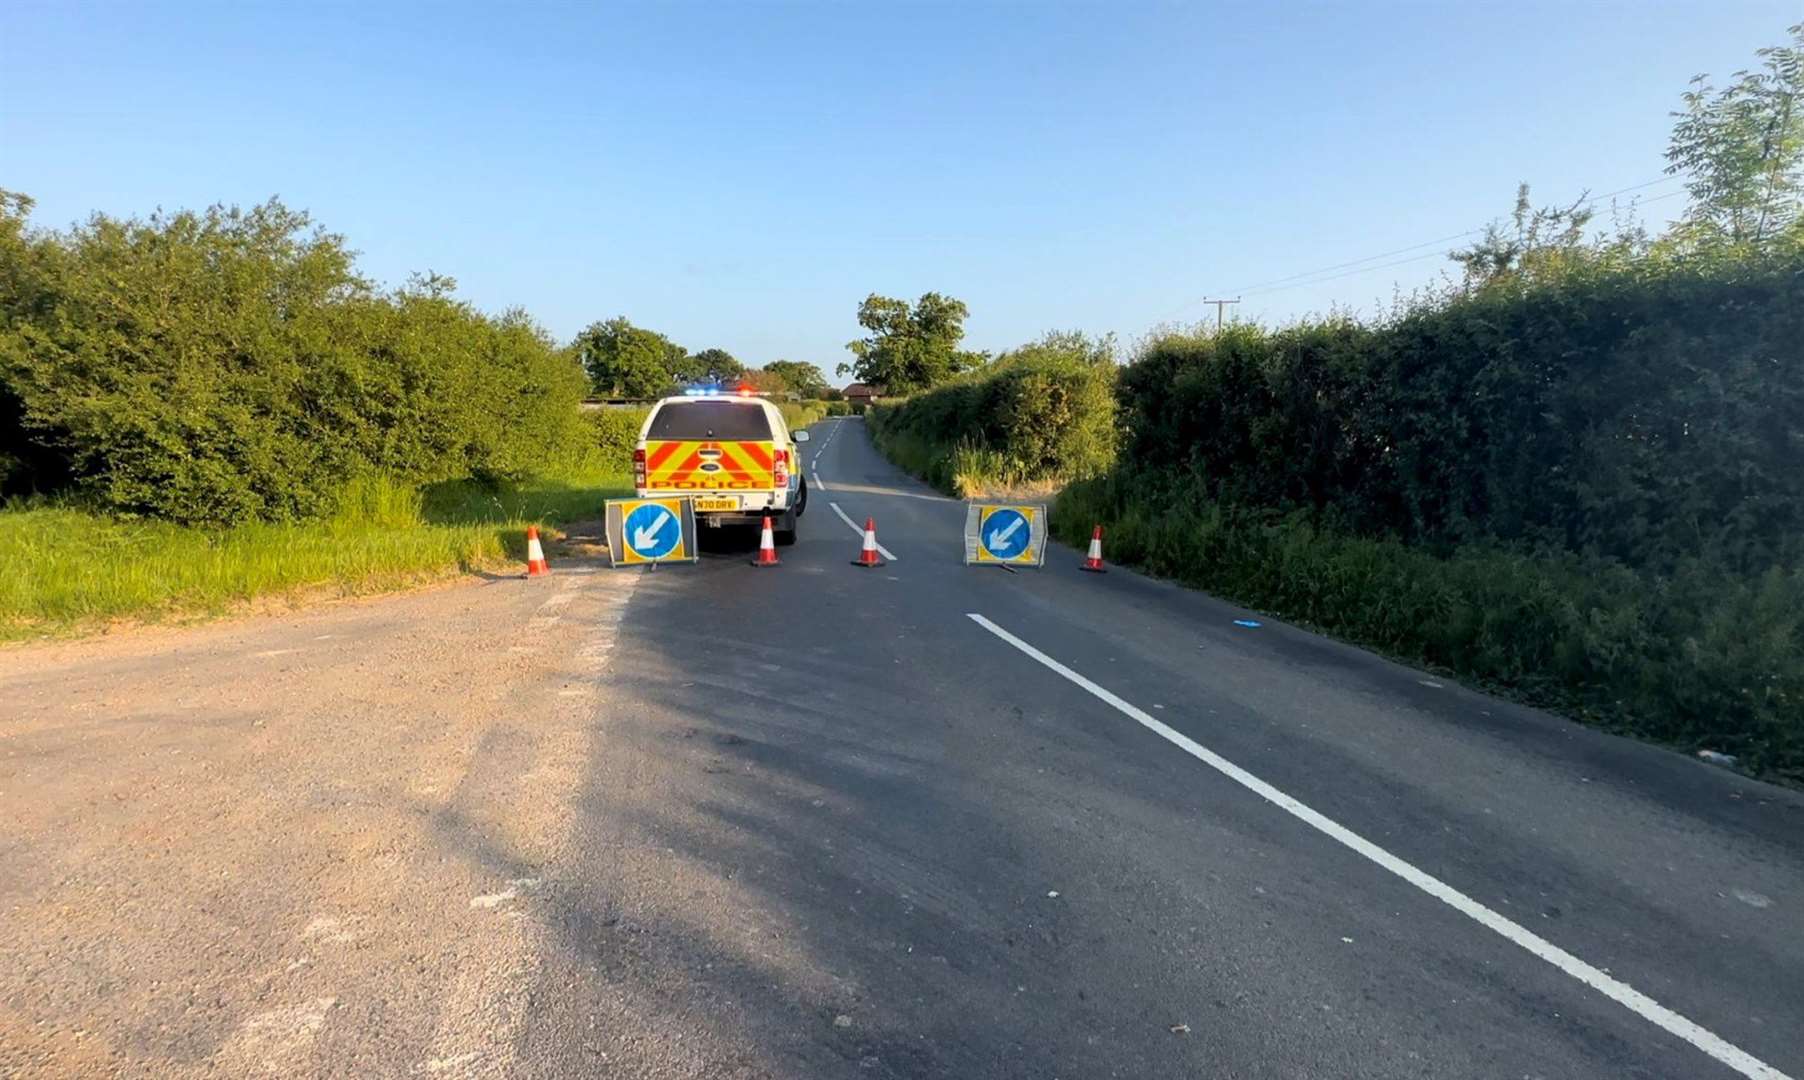 PC Simon Masterson, forensic collision investigator at Kent Police, told an inquest that faded road markings may have been a contributing factor in the crash. Picture: Josie Hannett / BBC